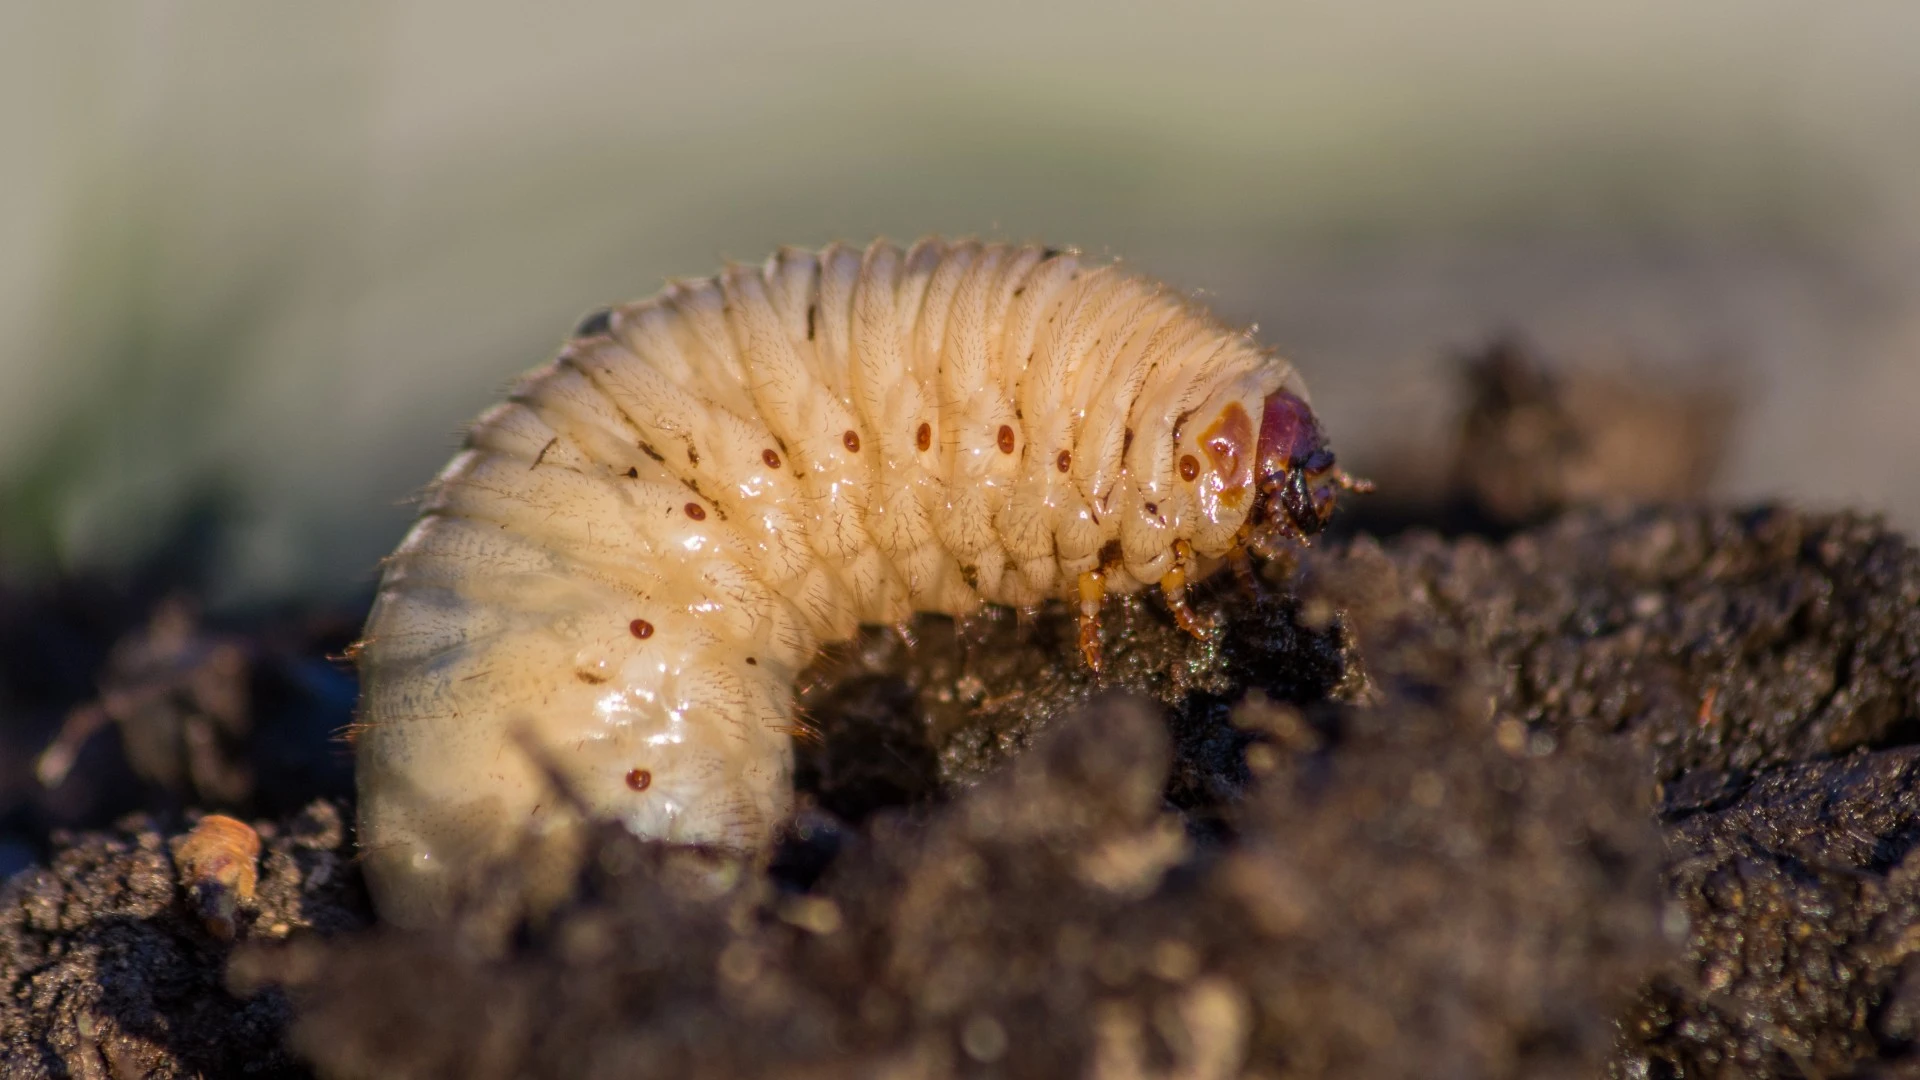 Grub Season Is on Its Way - Make Sure You Know the Signs to Look Out For